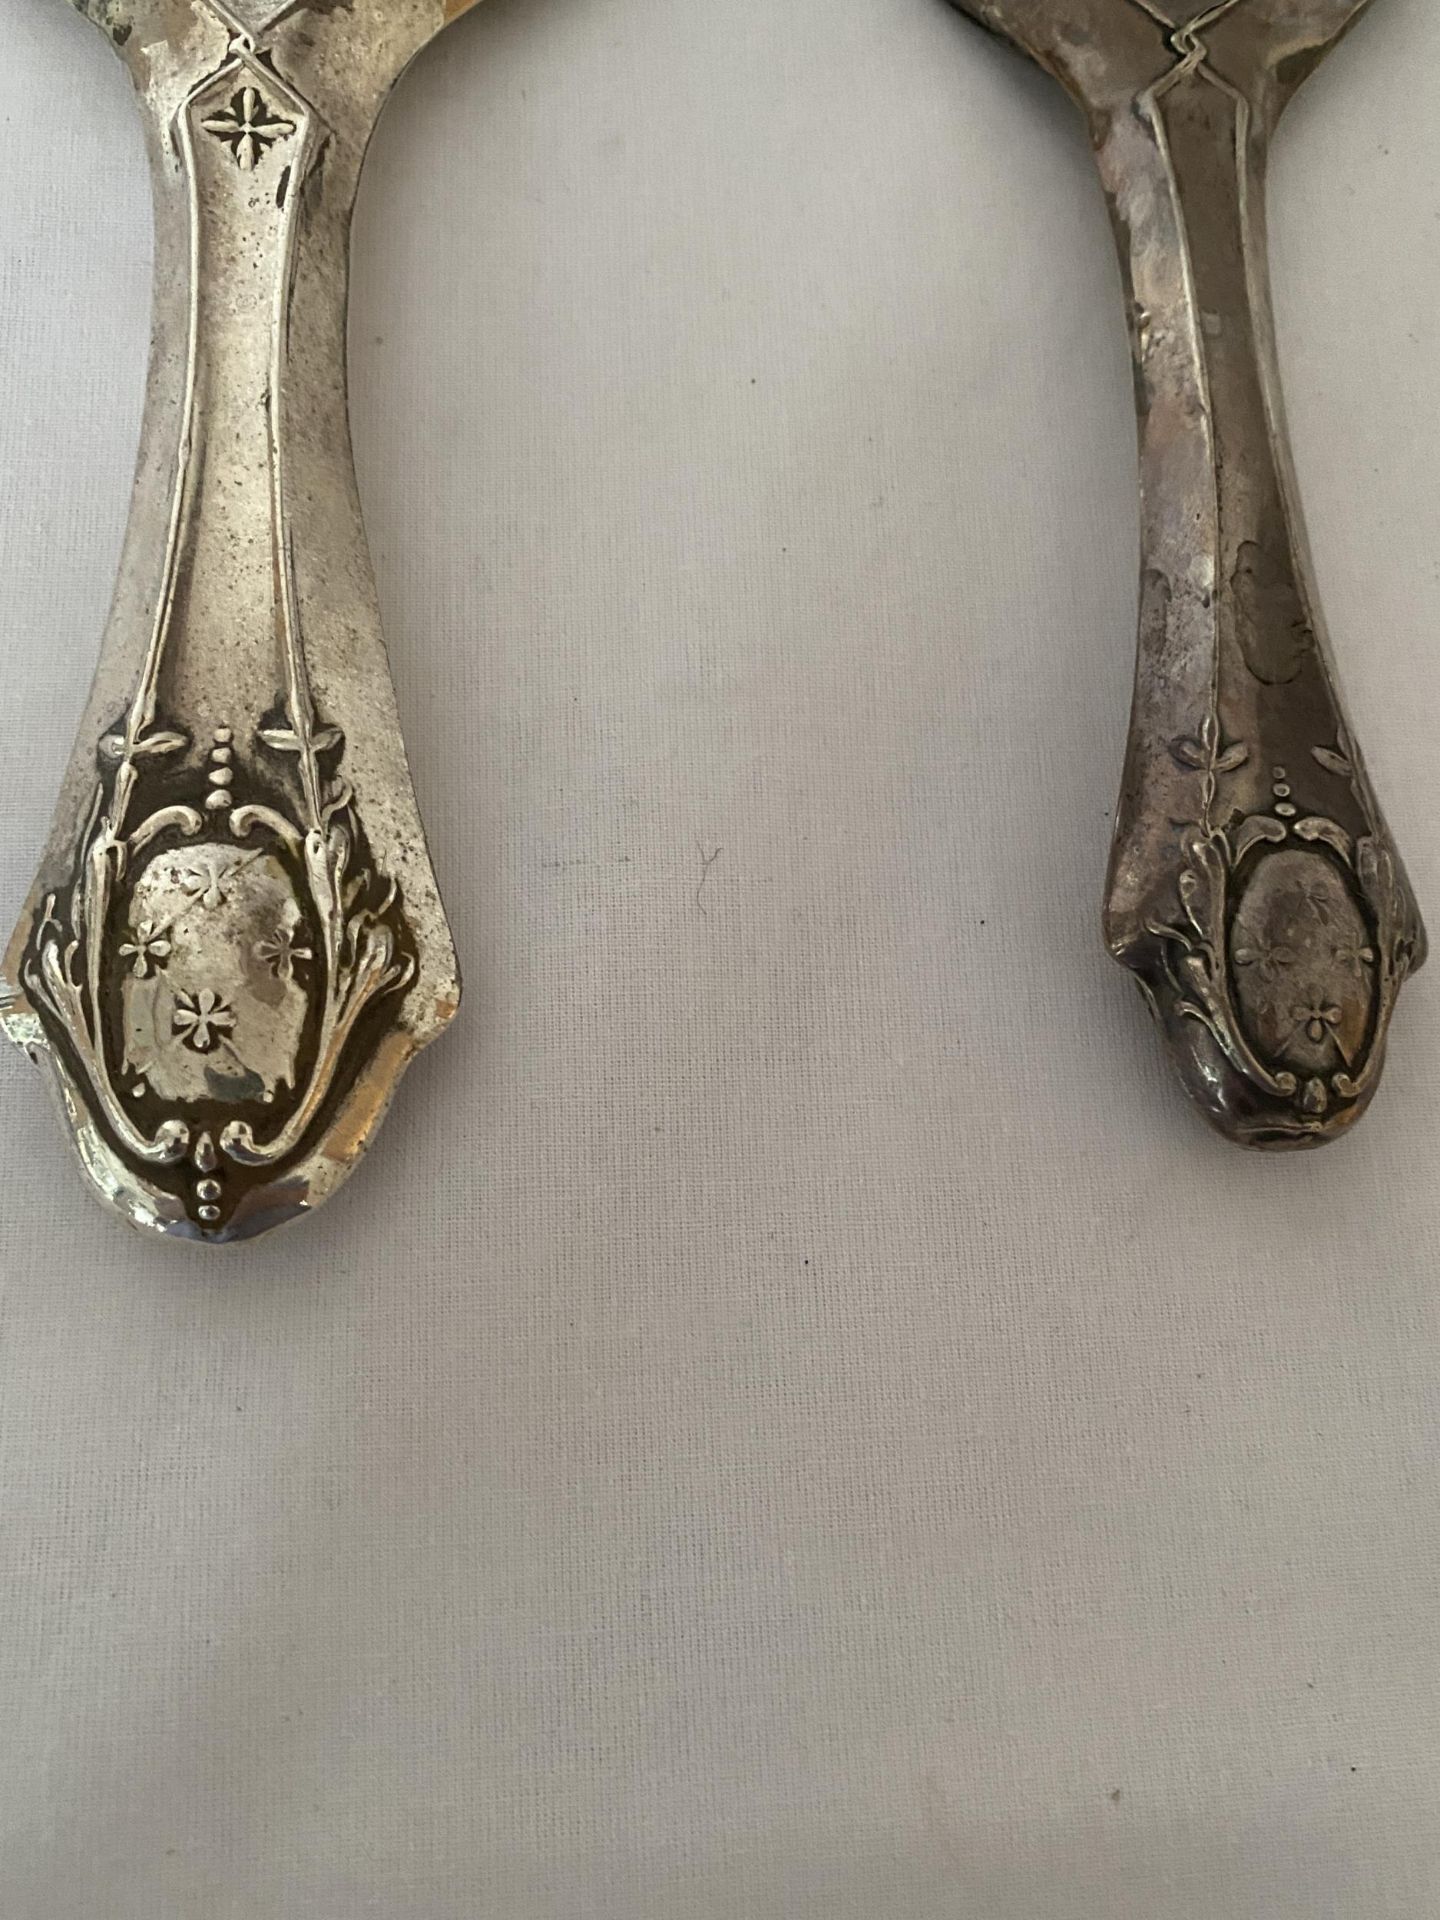 TWO HALLMARKED BIRMINGHAM SILVER BACKED HAND MIRRORS, EARLIEST DATING TO 1913 - Image 9 of 18